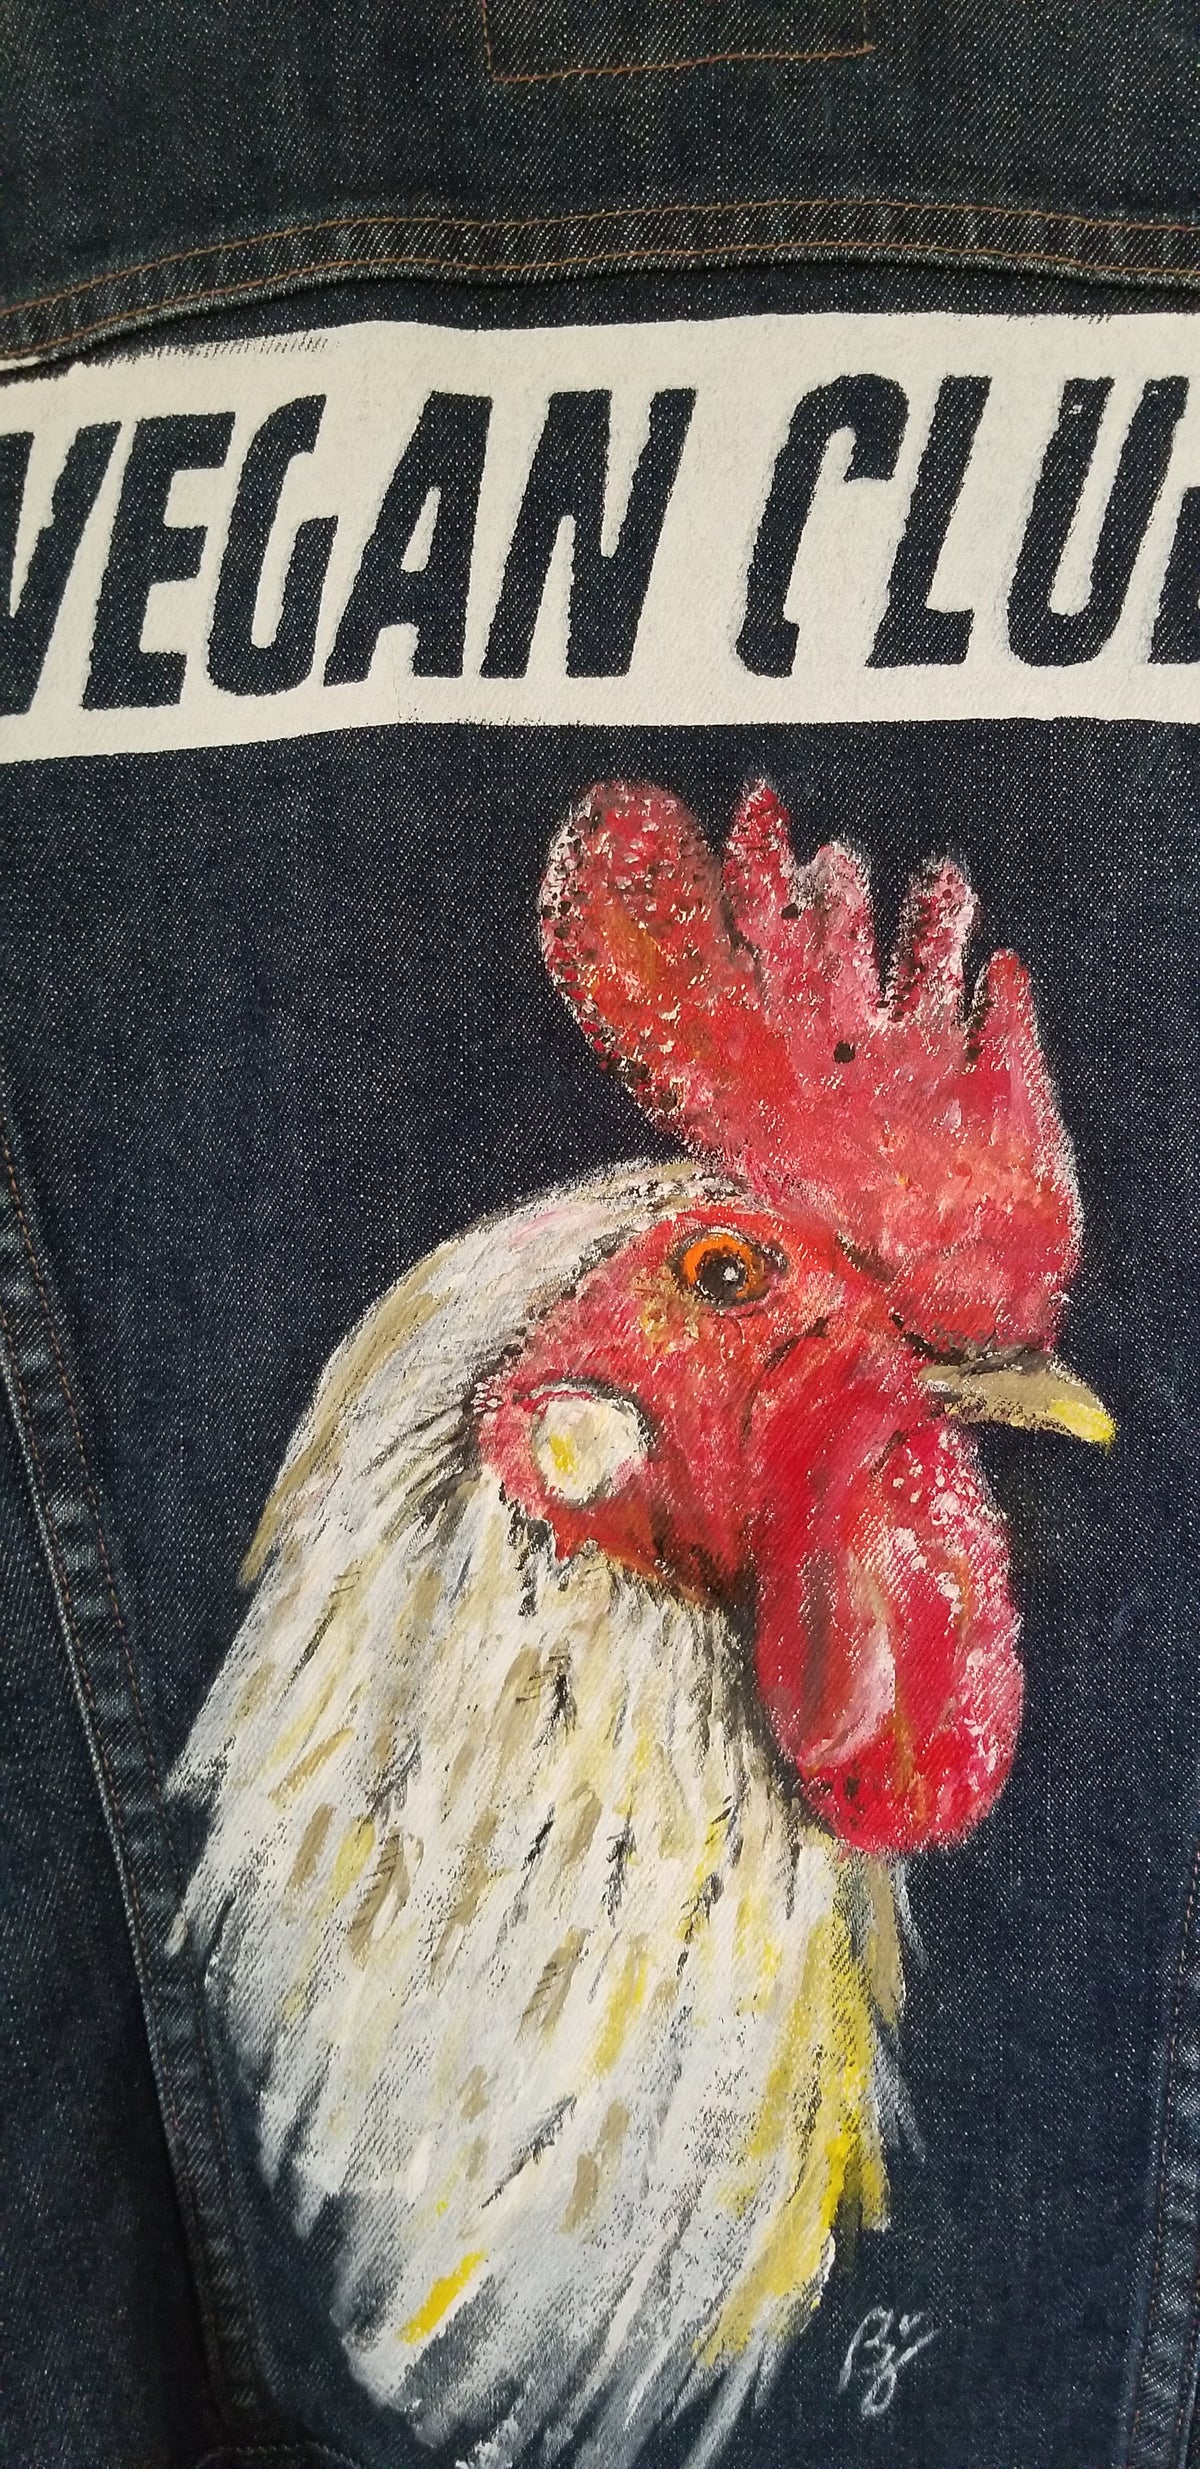 SOLD - Upcycled Jean Jacket Vest Vegan Club featuring a chicken hand-painted by artist Brandi Jae